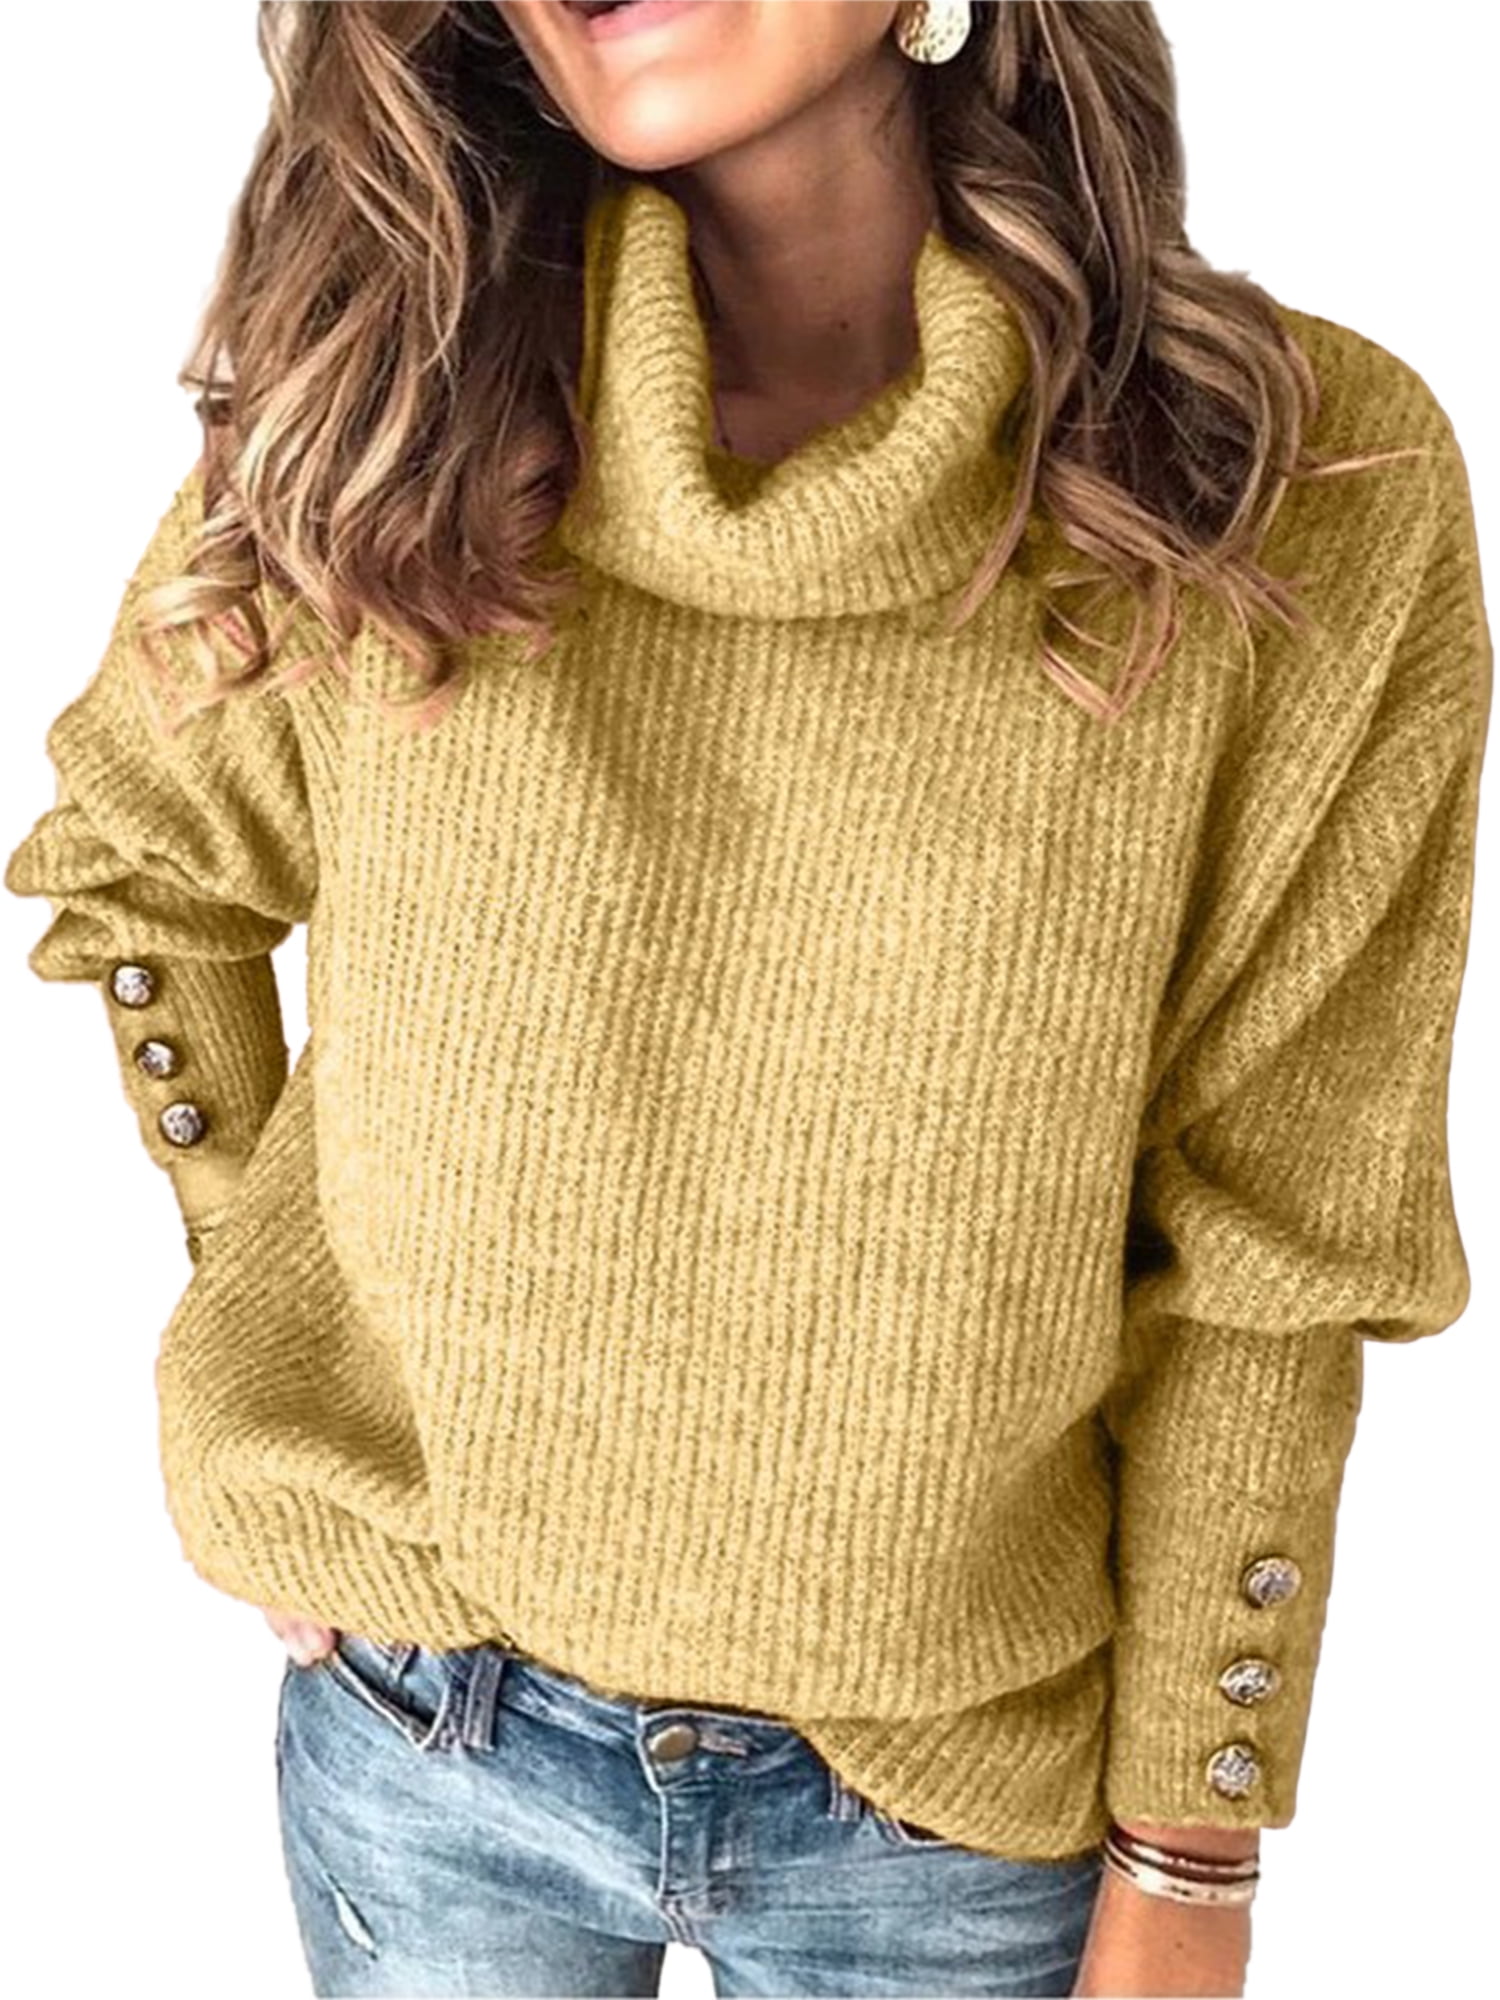 Knit Shirt Knitted Loose Womens Pullover Jumper Knitwear Long Sleeve Sweater 